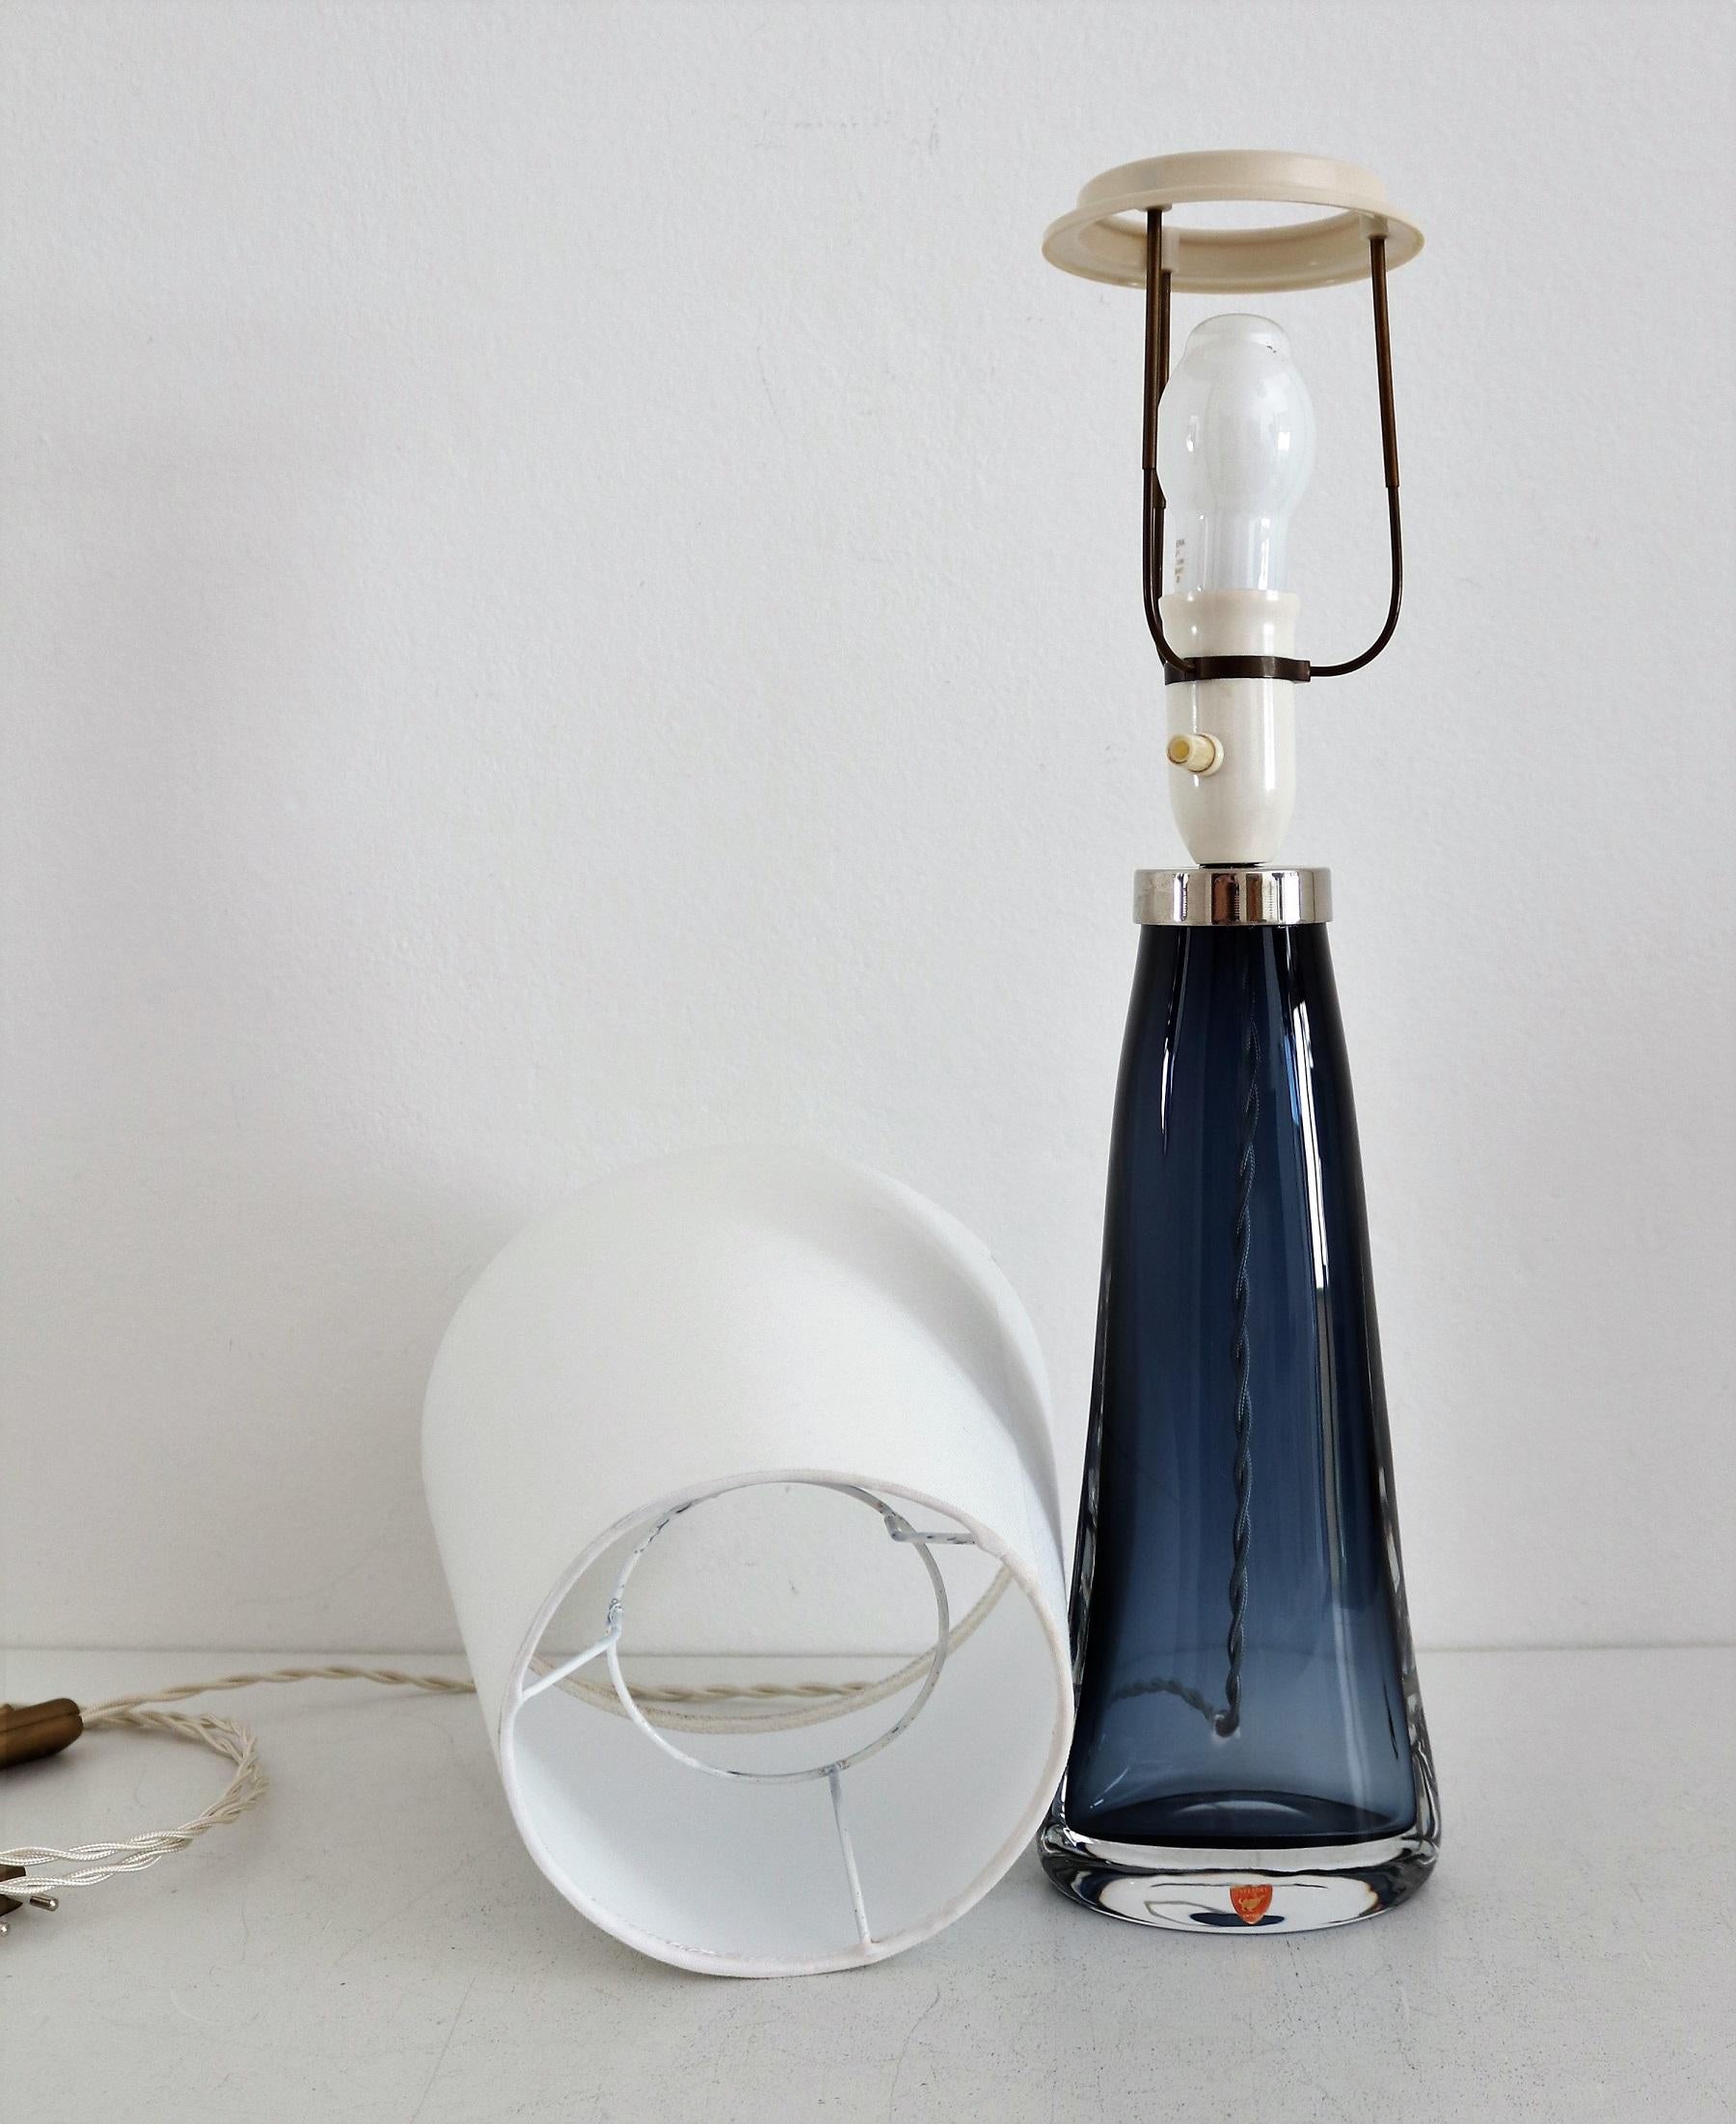 Swedish Midcentury Crystal Table Lamp by Carl Fagerlund for Orrefors, 1960s For Sale 7